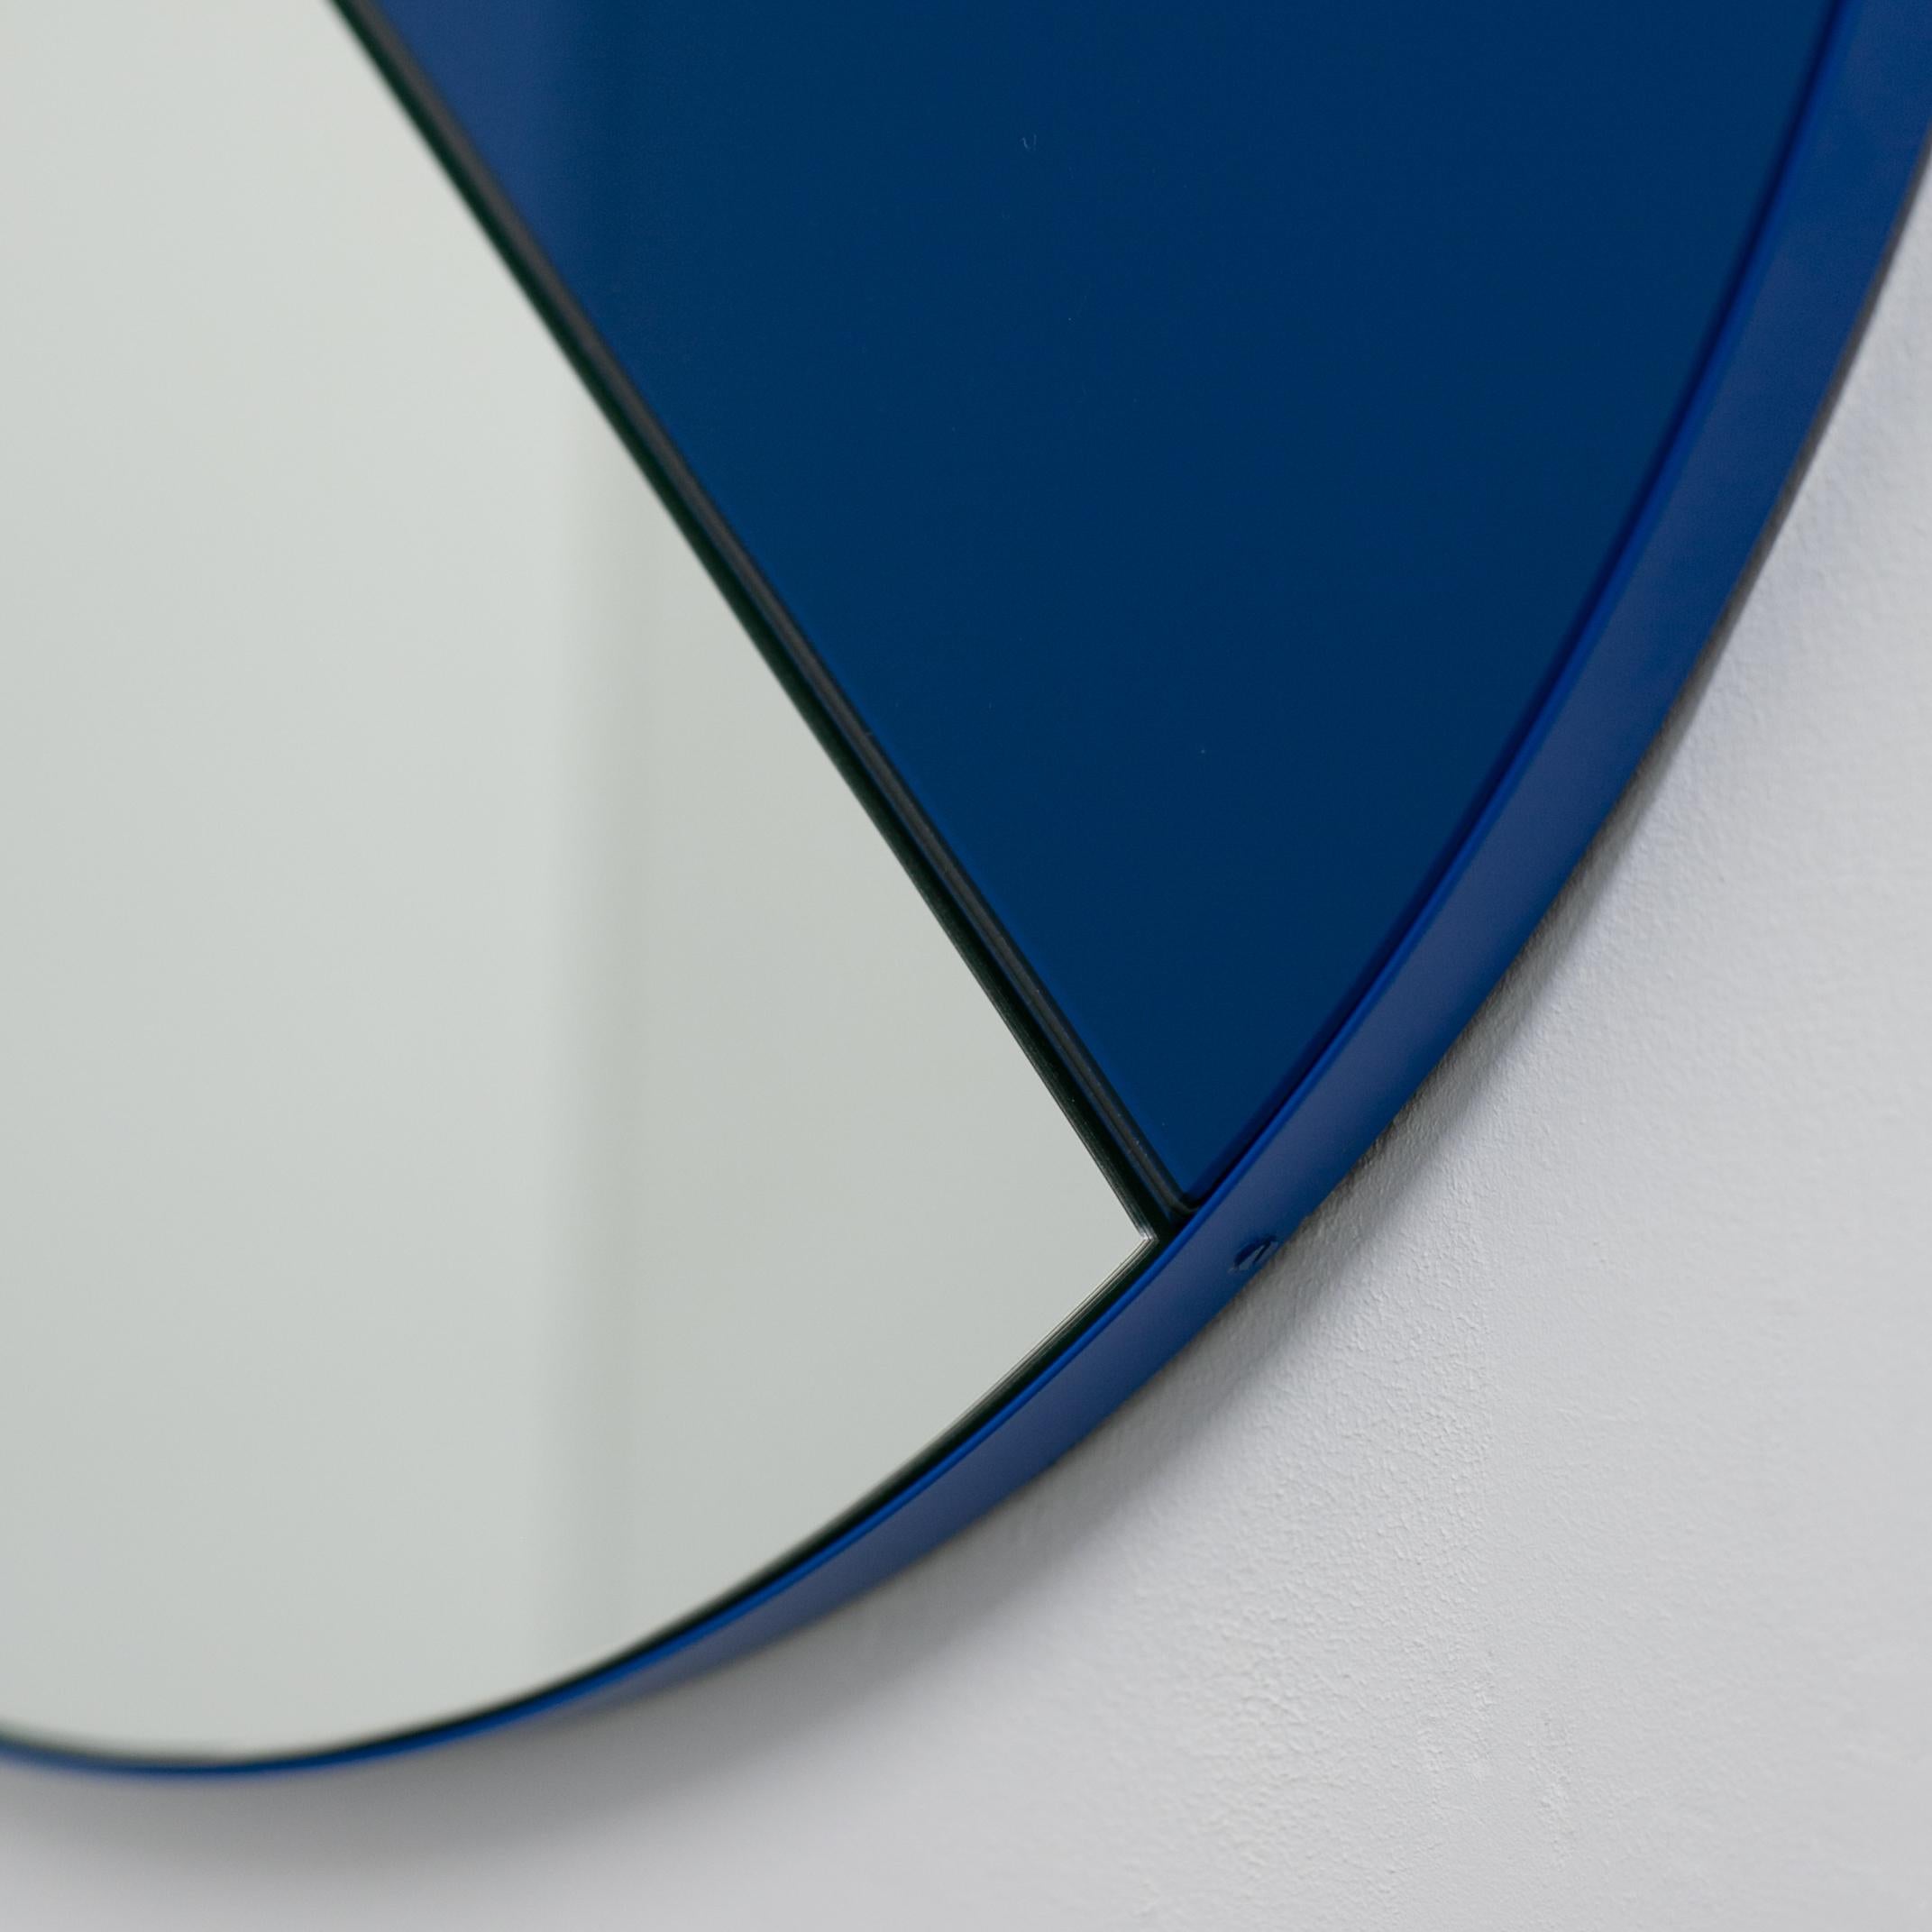 Orbis Dualis Contemporary Blue and Silver Round Mirror with Blue Frame, Large For Sale 6